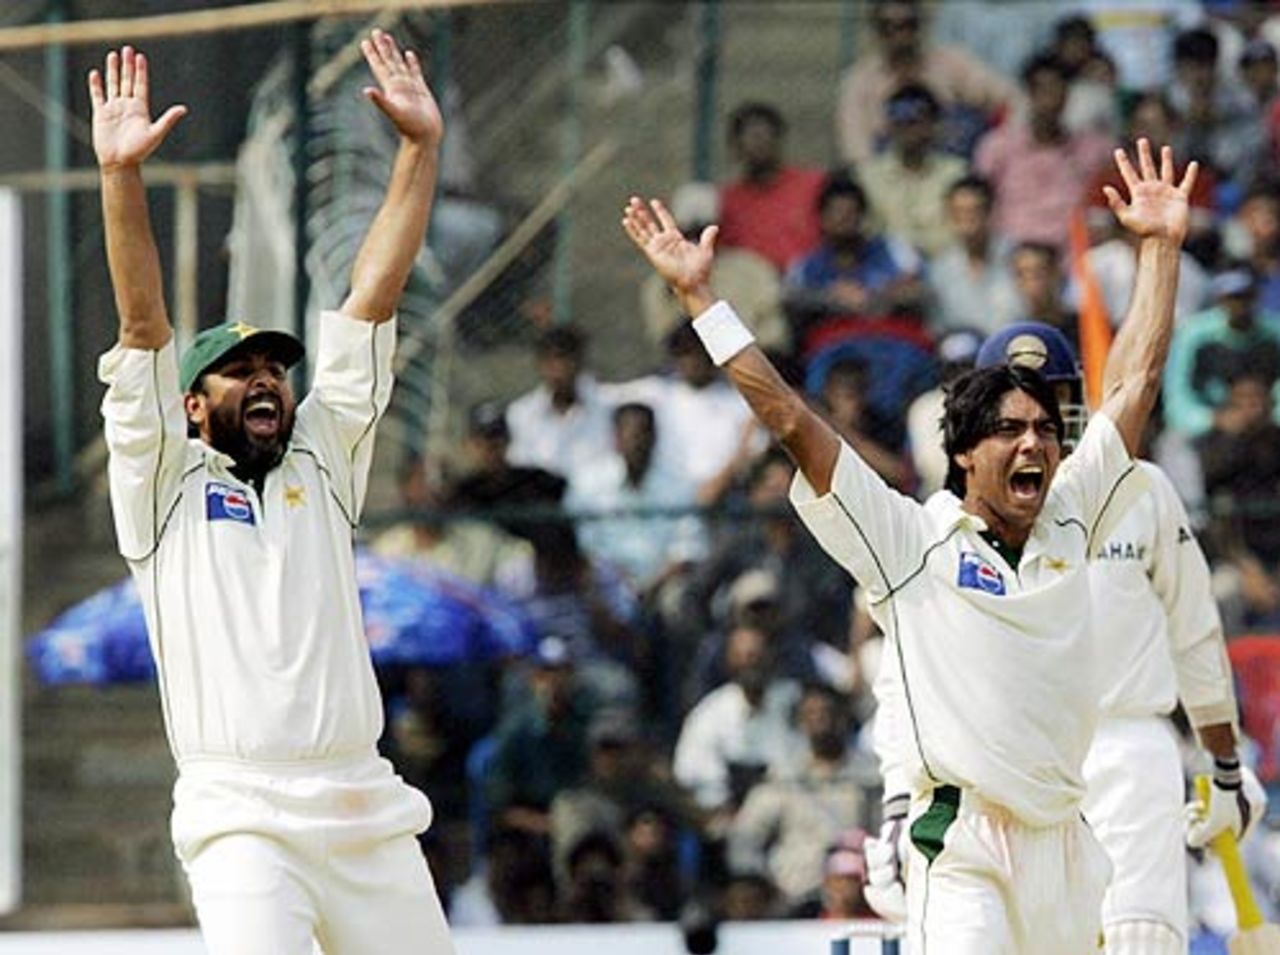 Mohammad Sami and Inzamam-ul-Haq appeal in vain for a leg before decision against VVS Laxman, India v Pakistan, 3rd Test, Bangalore, 5th day, March 28, 2005